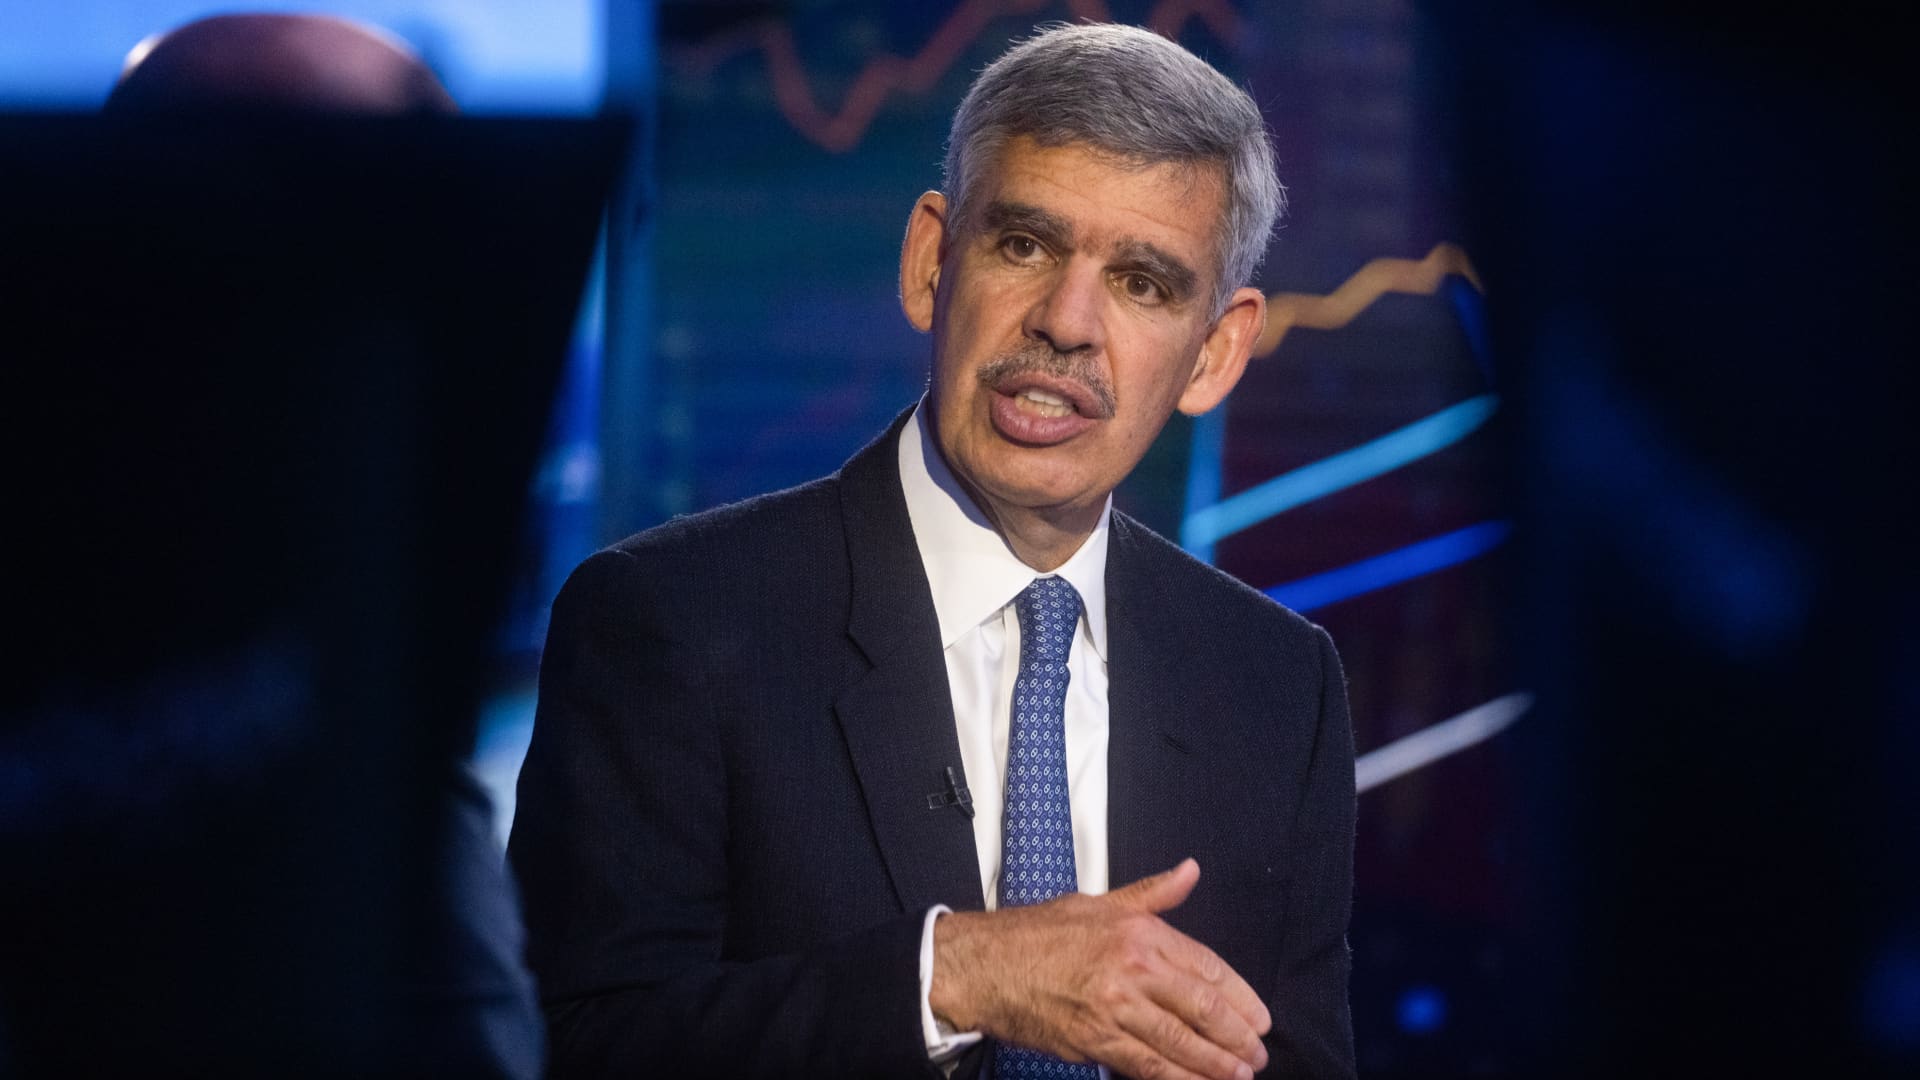 El-Erian says the Fed has turned into a play-by-play commentator